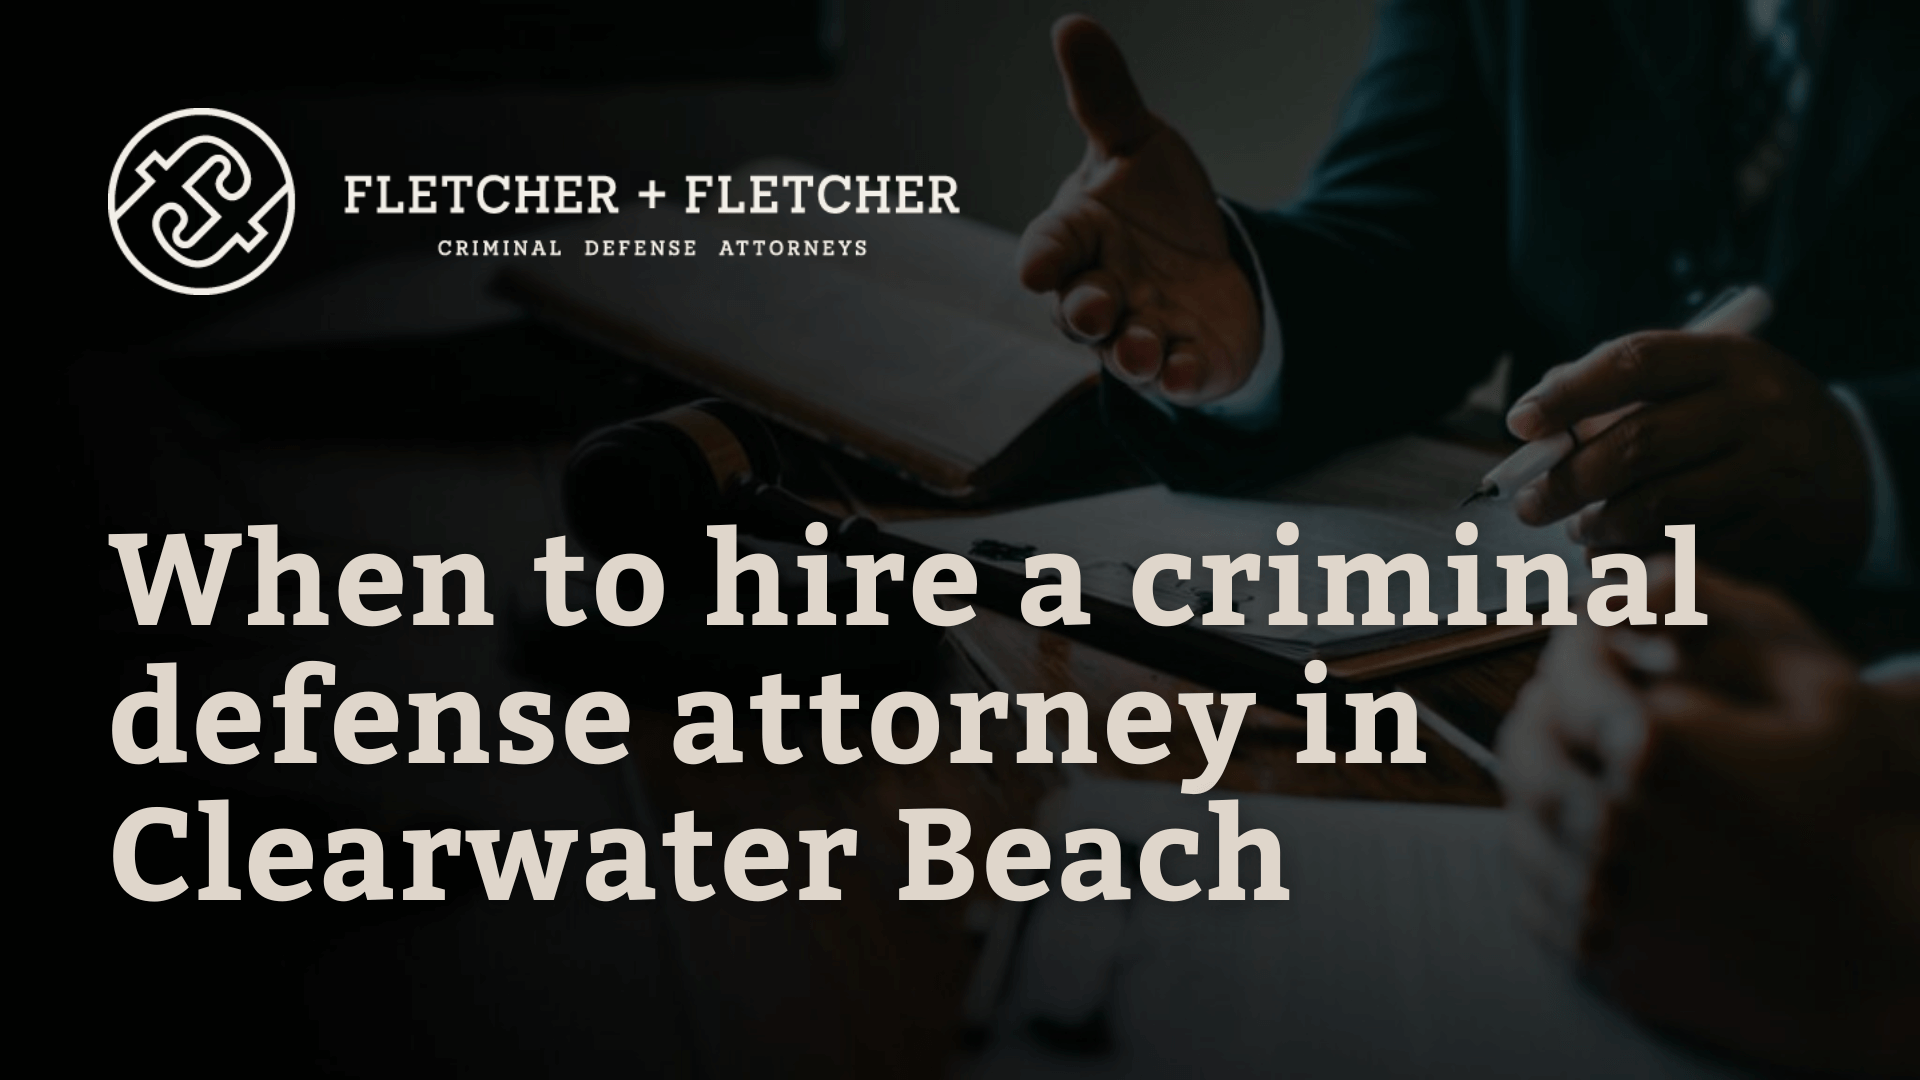 When to hire a criminal defense attorney in Clearwater Beach - Fletcher Fletcher Florida criminal defense lawyers